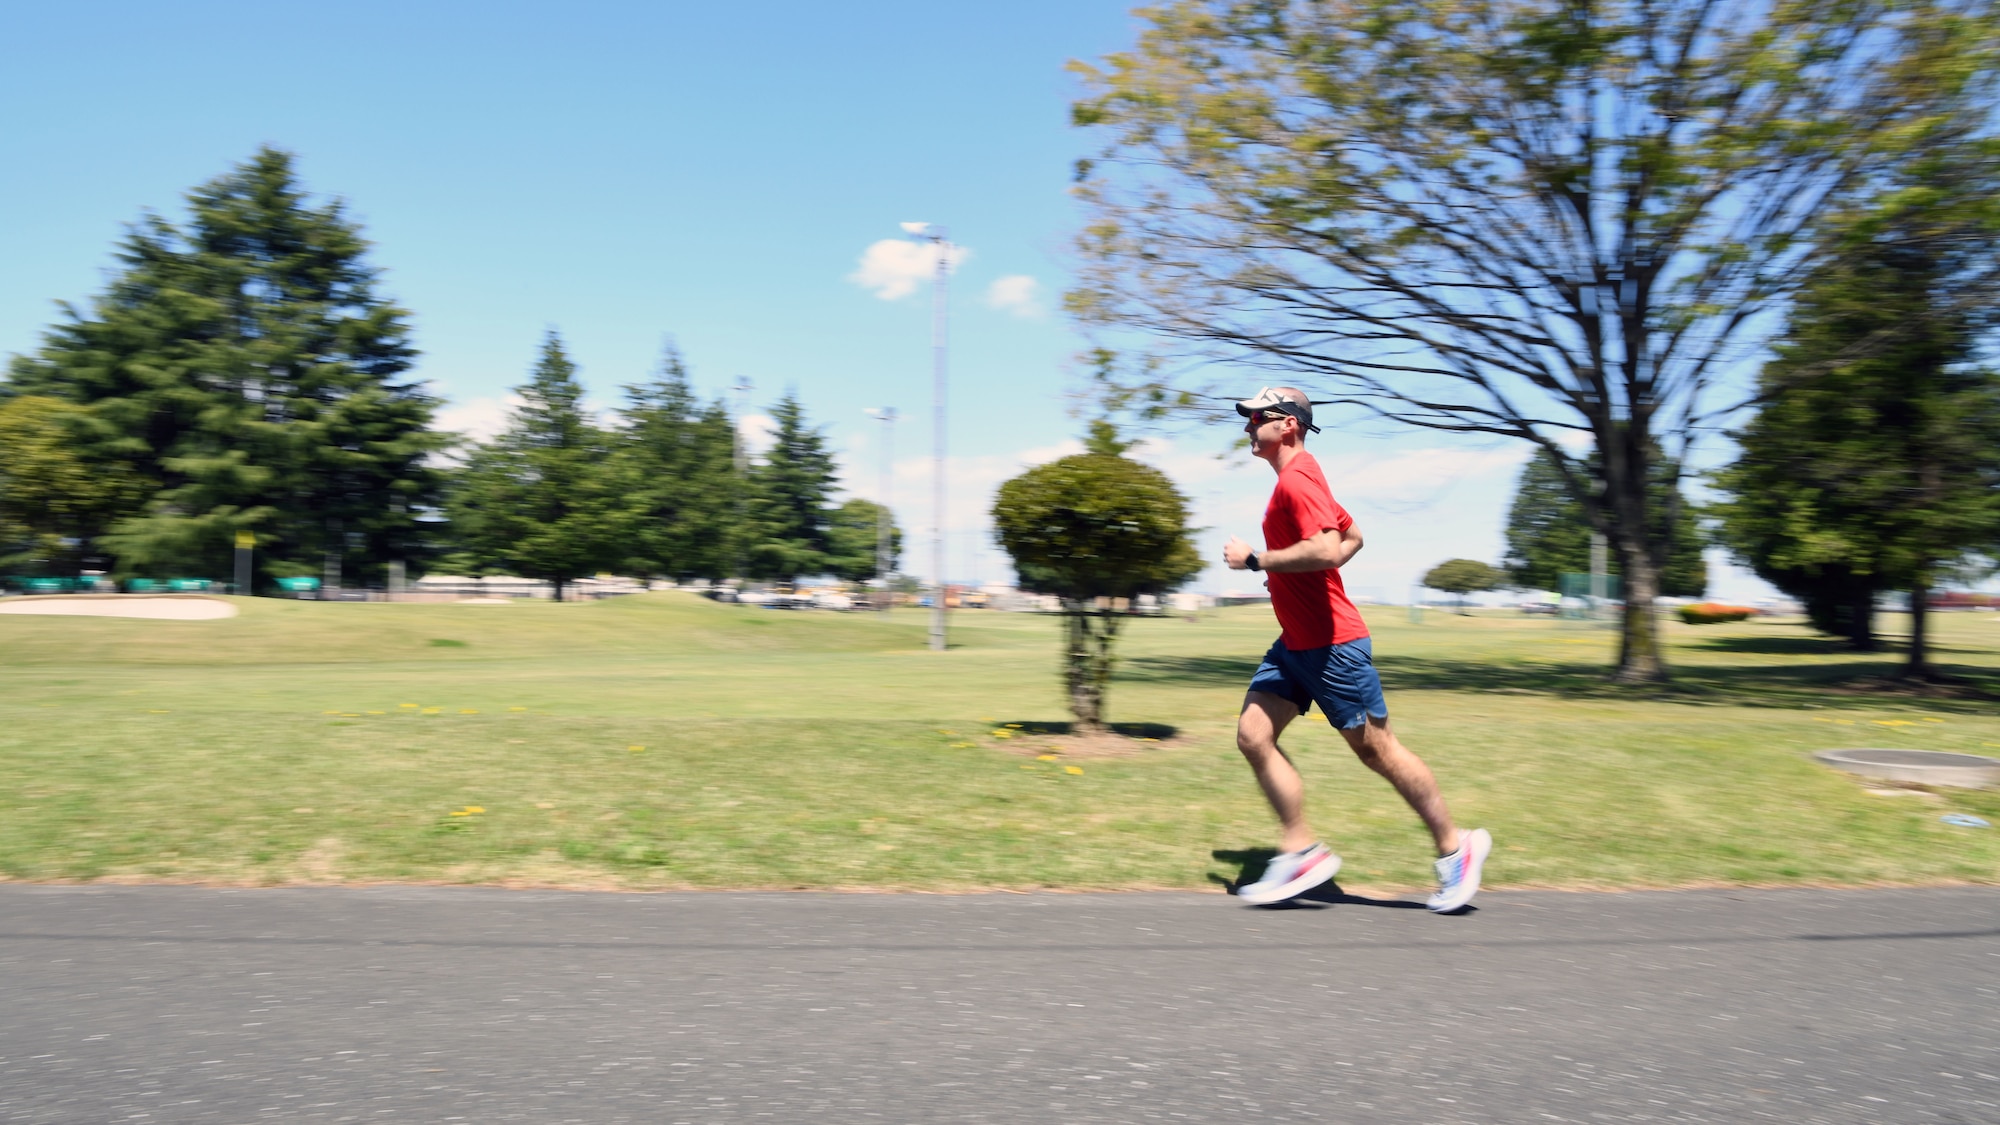 After an ultra-marathon at the Fuji Five Lakes near Mt. Fuji, Japan was cancelled due to COVID-19, Gulledge optimized his training to run 62 miles at the Yokota Air Base Par Three Golf Course.